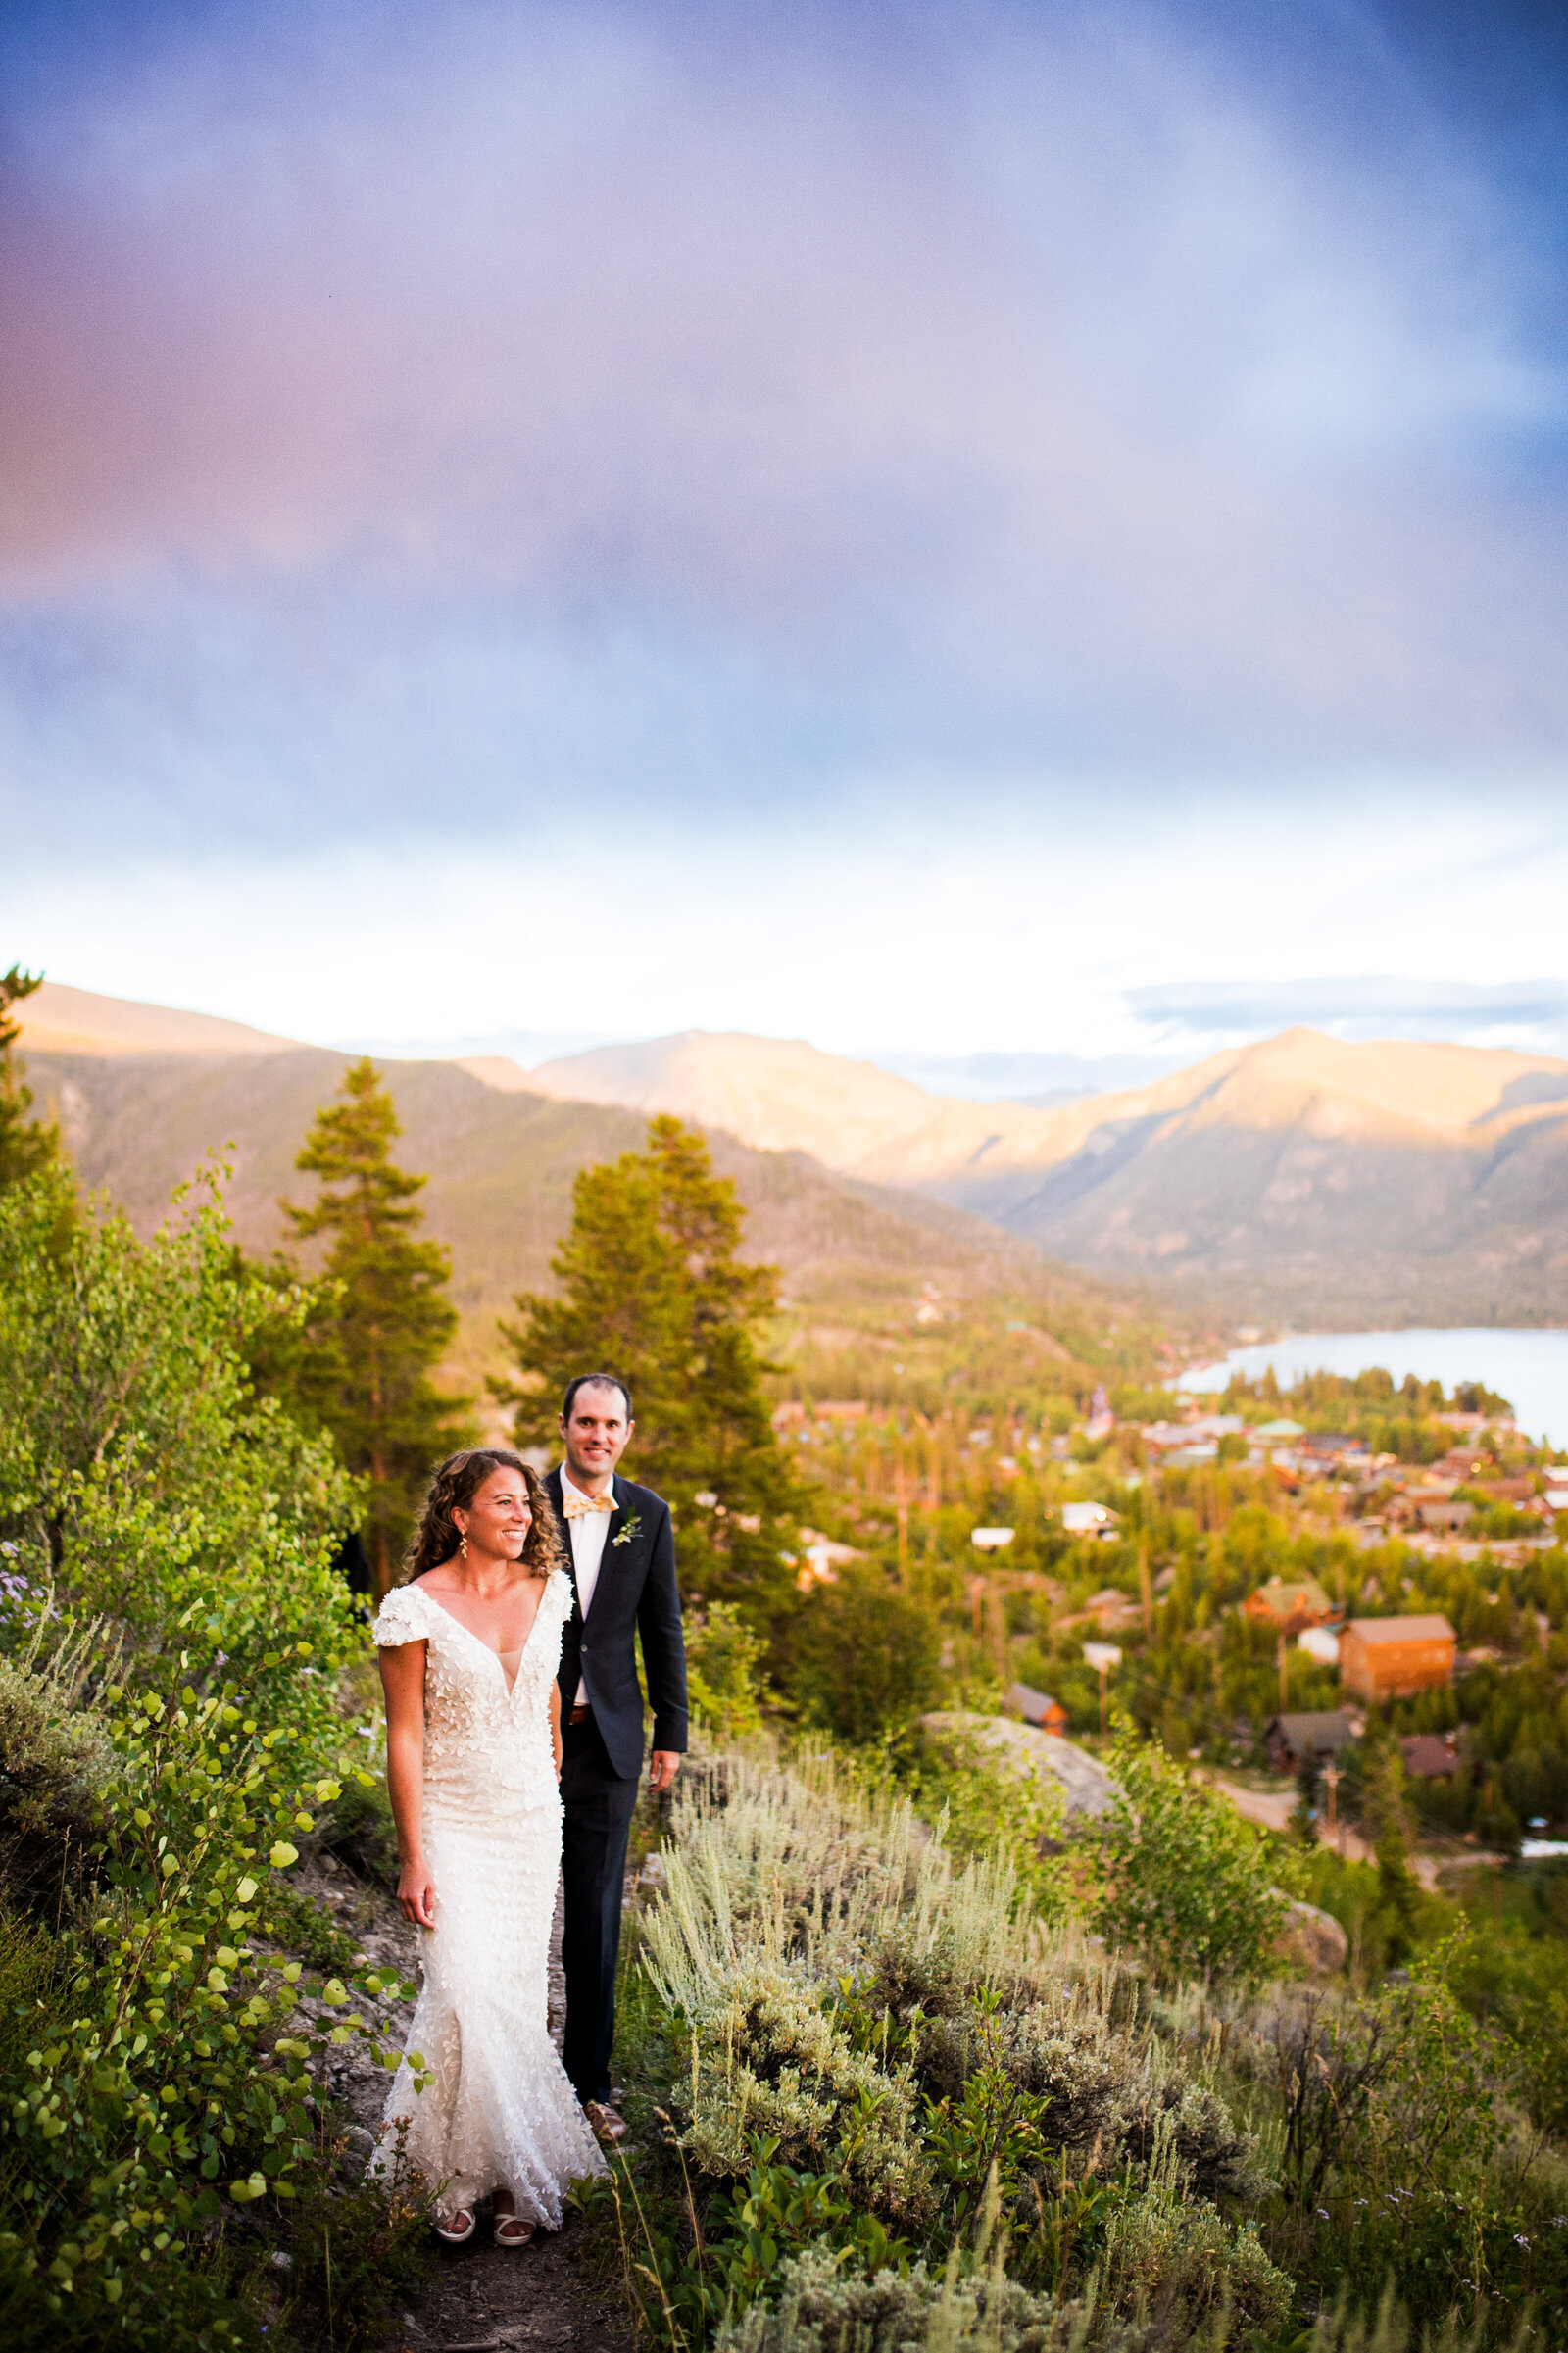 Bride and groom walk hand-in-hand toward the camera at golden hour with a Colorado mountain landscape in the background.